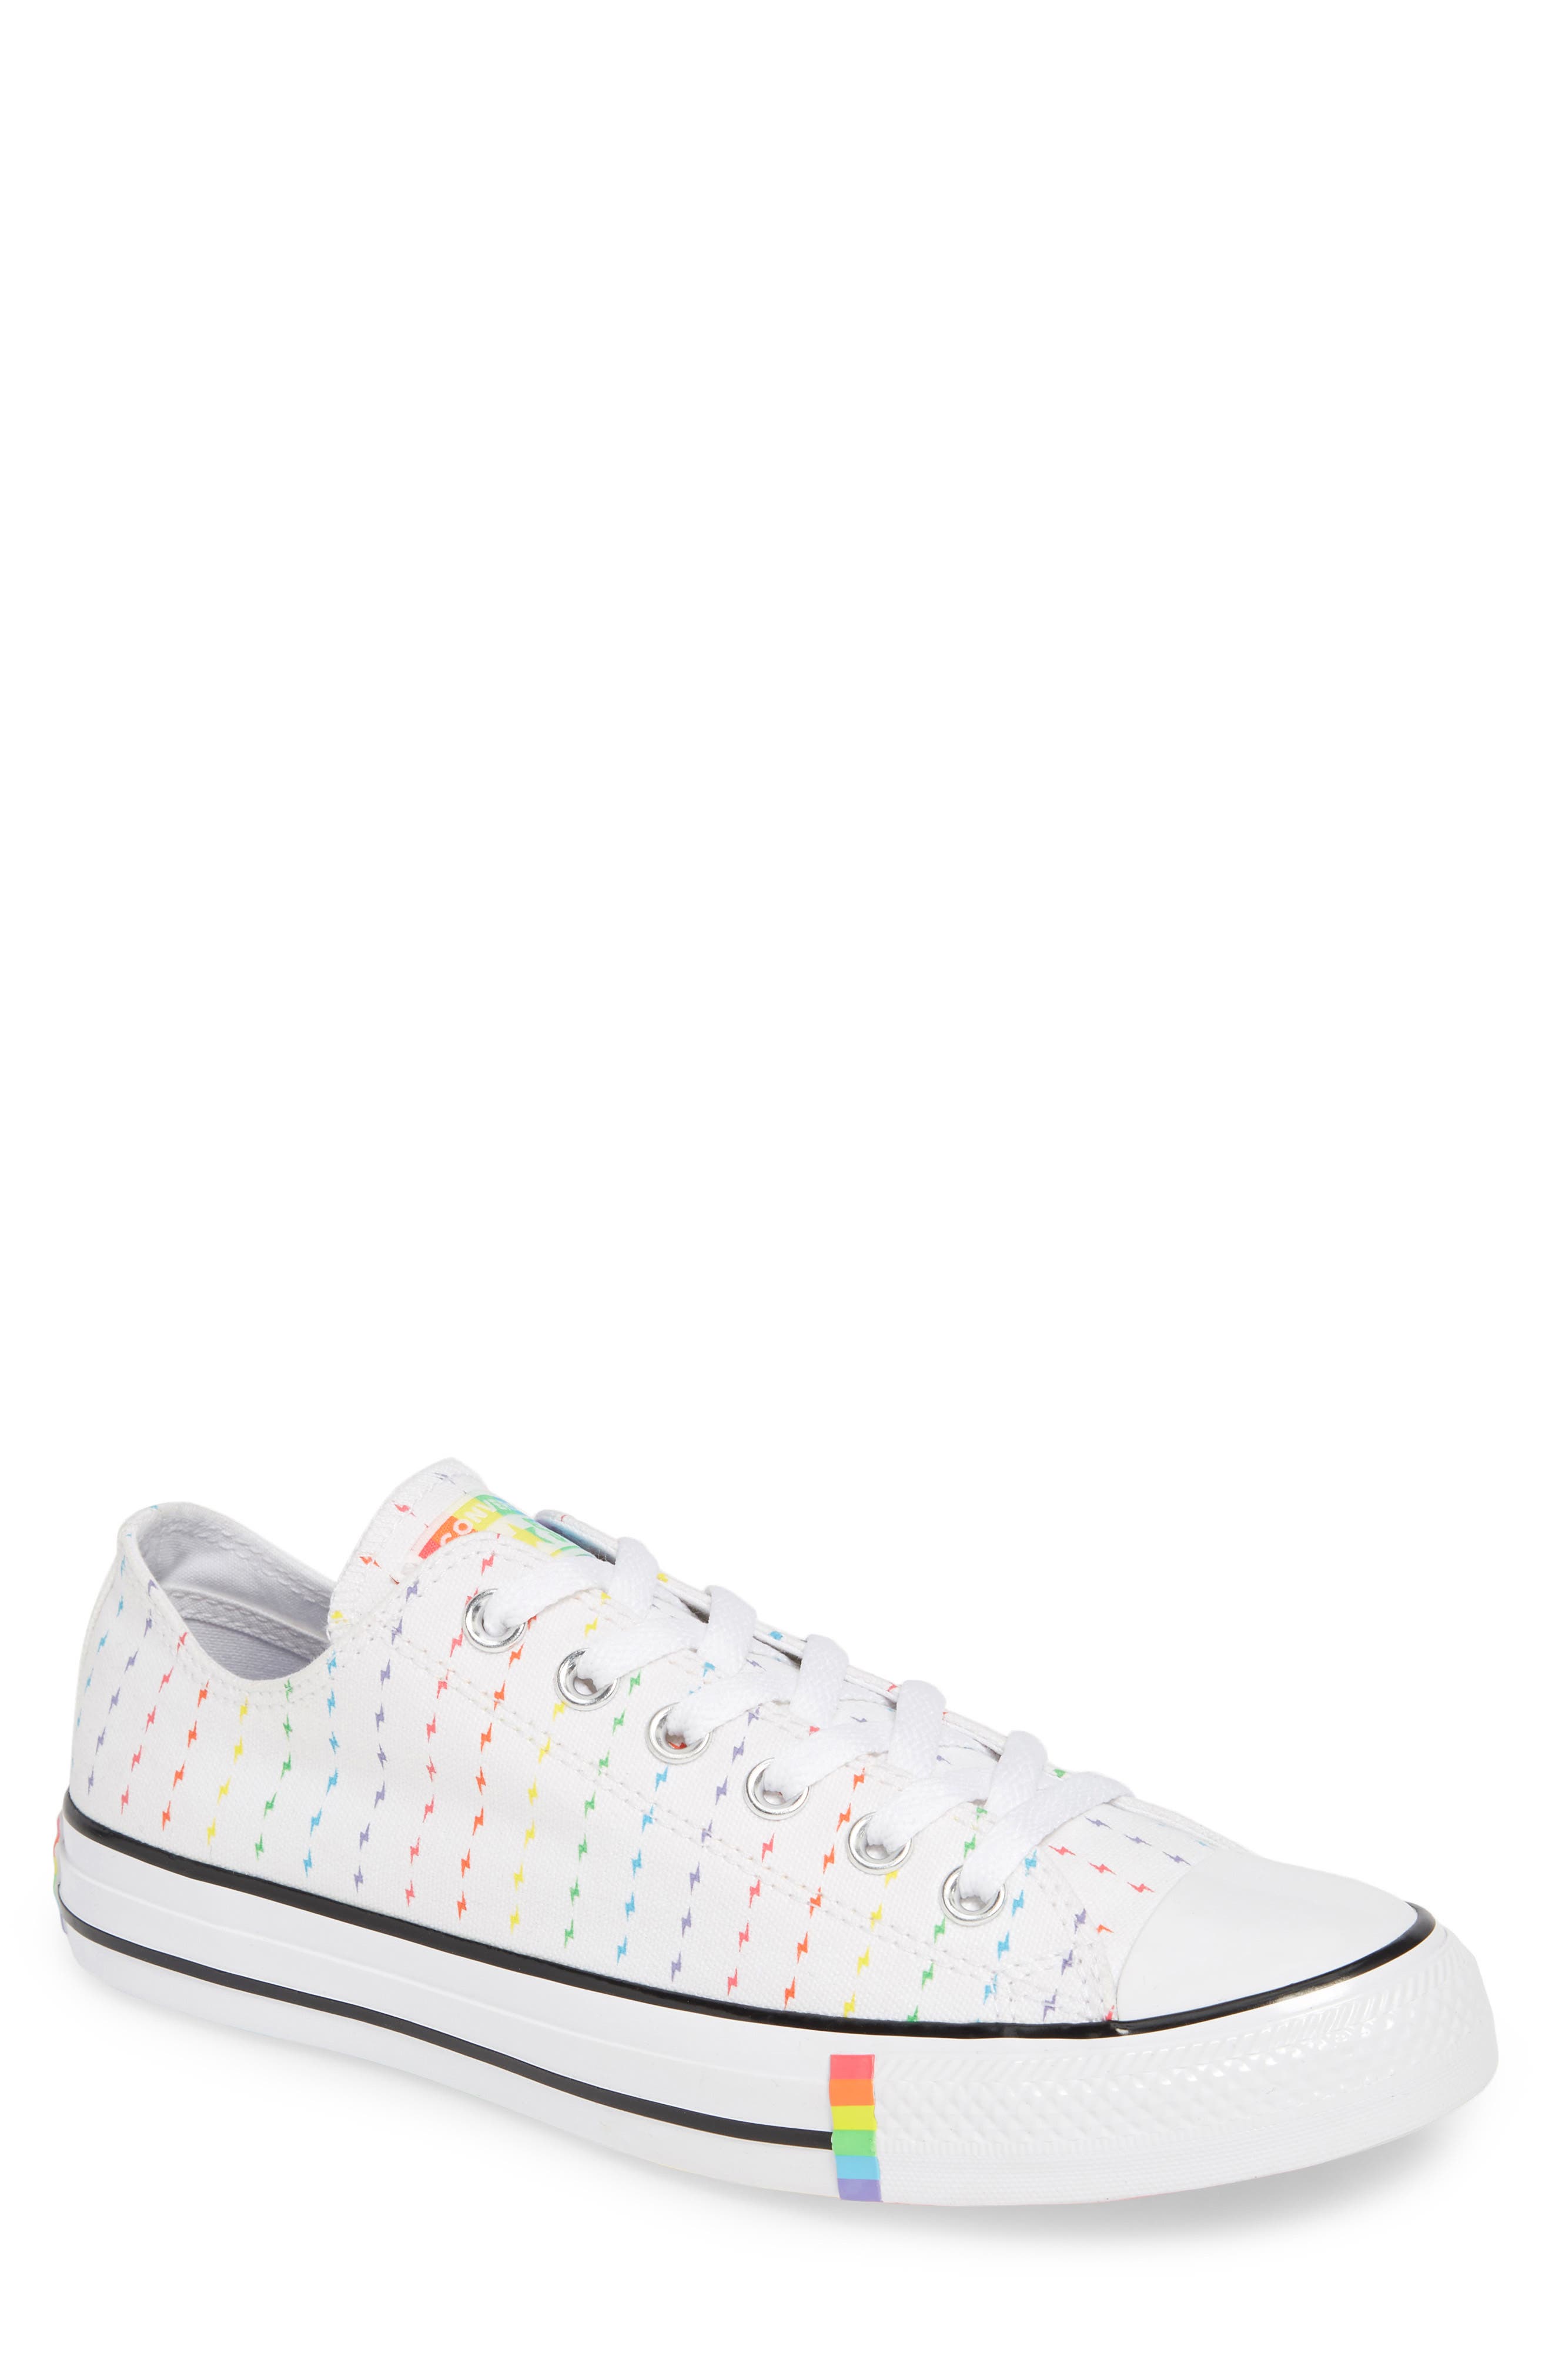 converse unisex chuck taylor all star low top sneakers